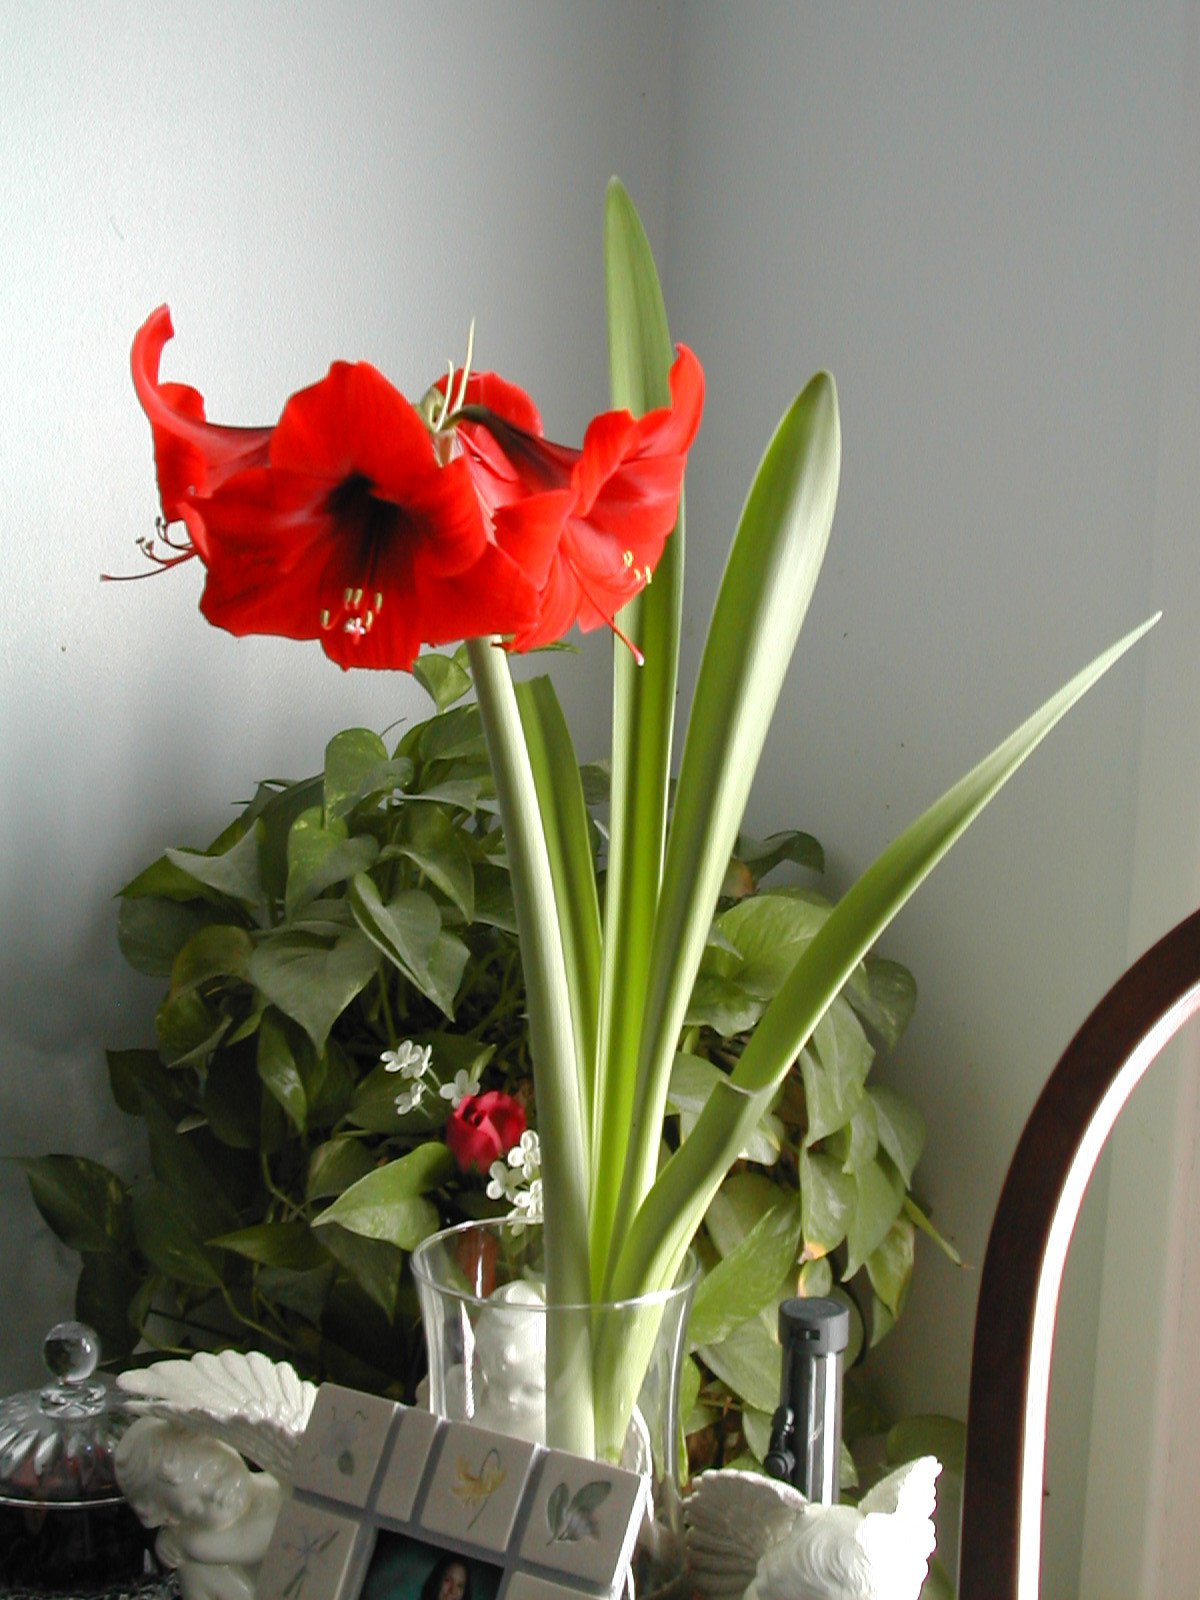 Red Christmas Flower Names
 The Other Red Christmas Flower Amaryllis Planting and